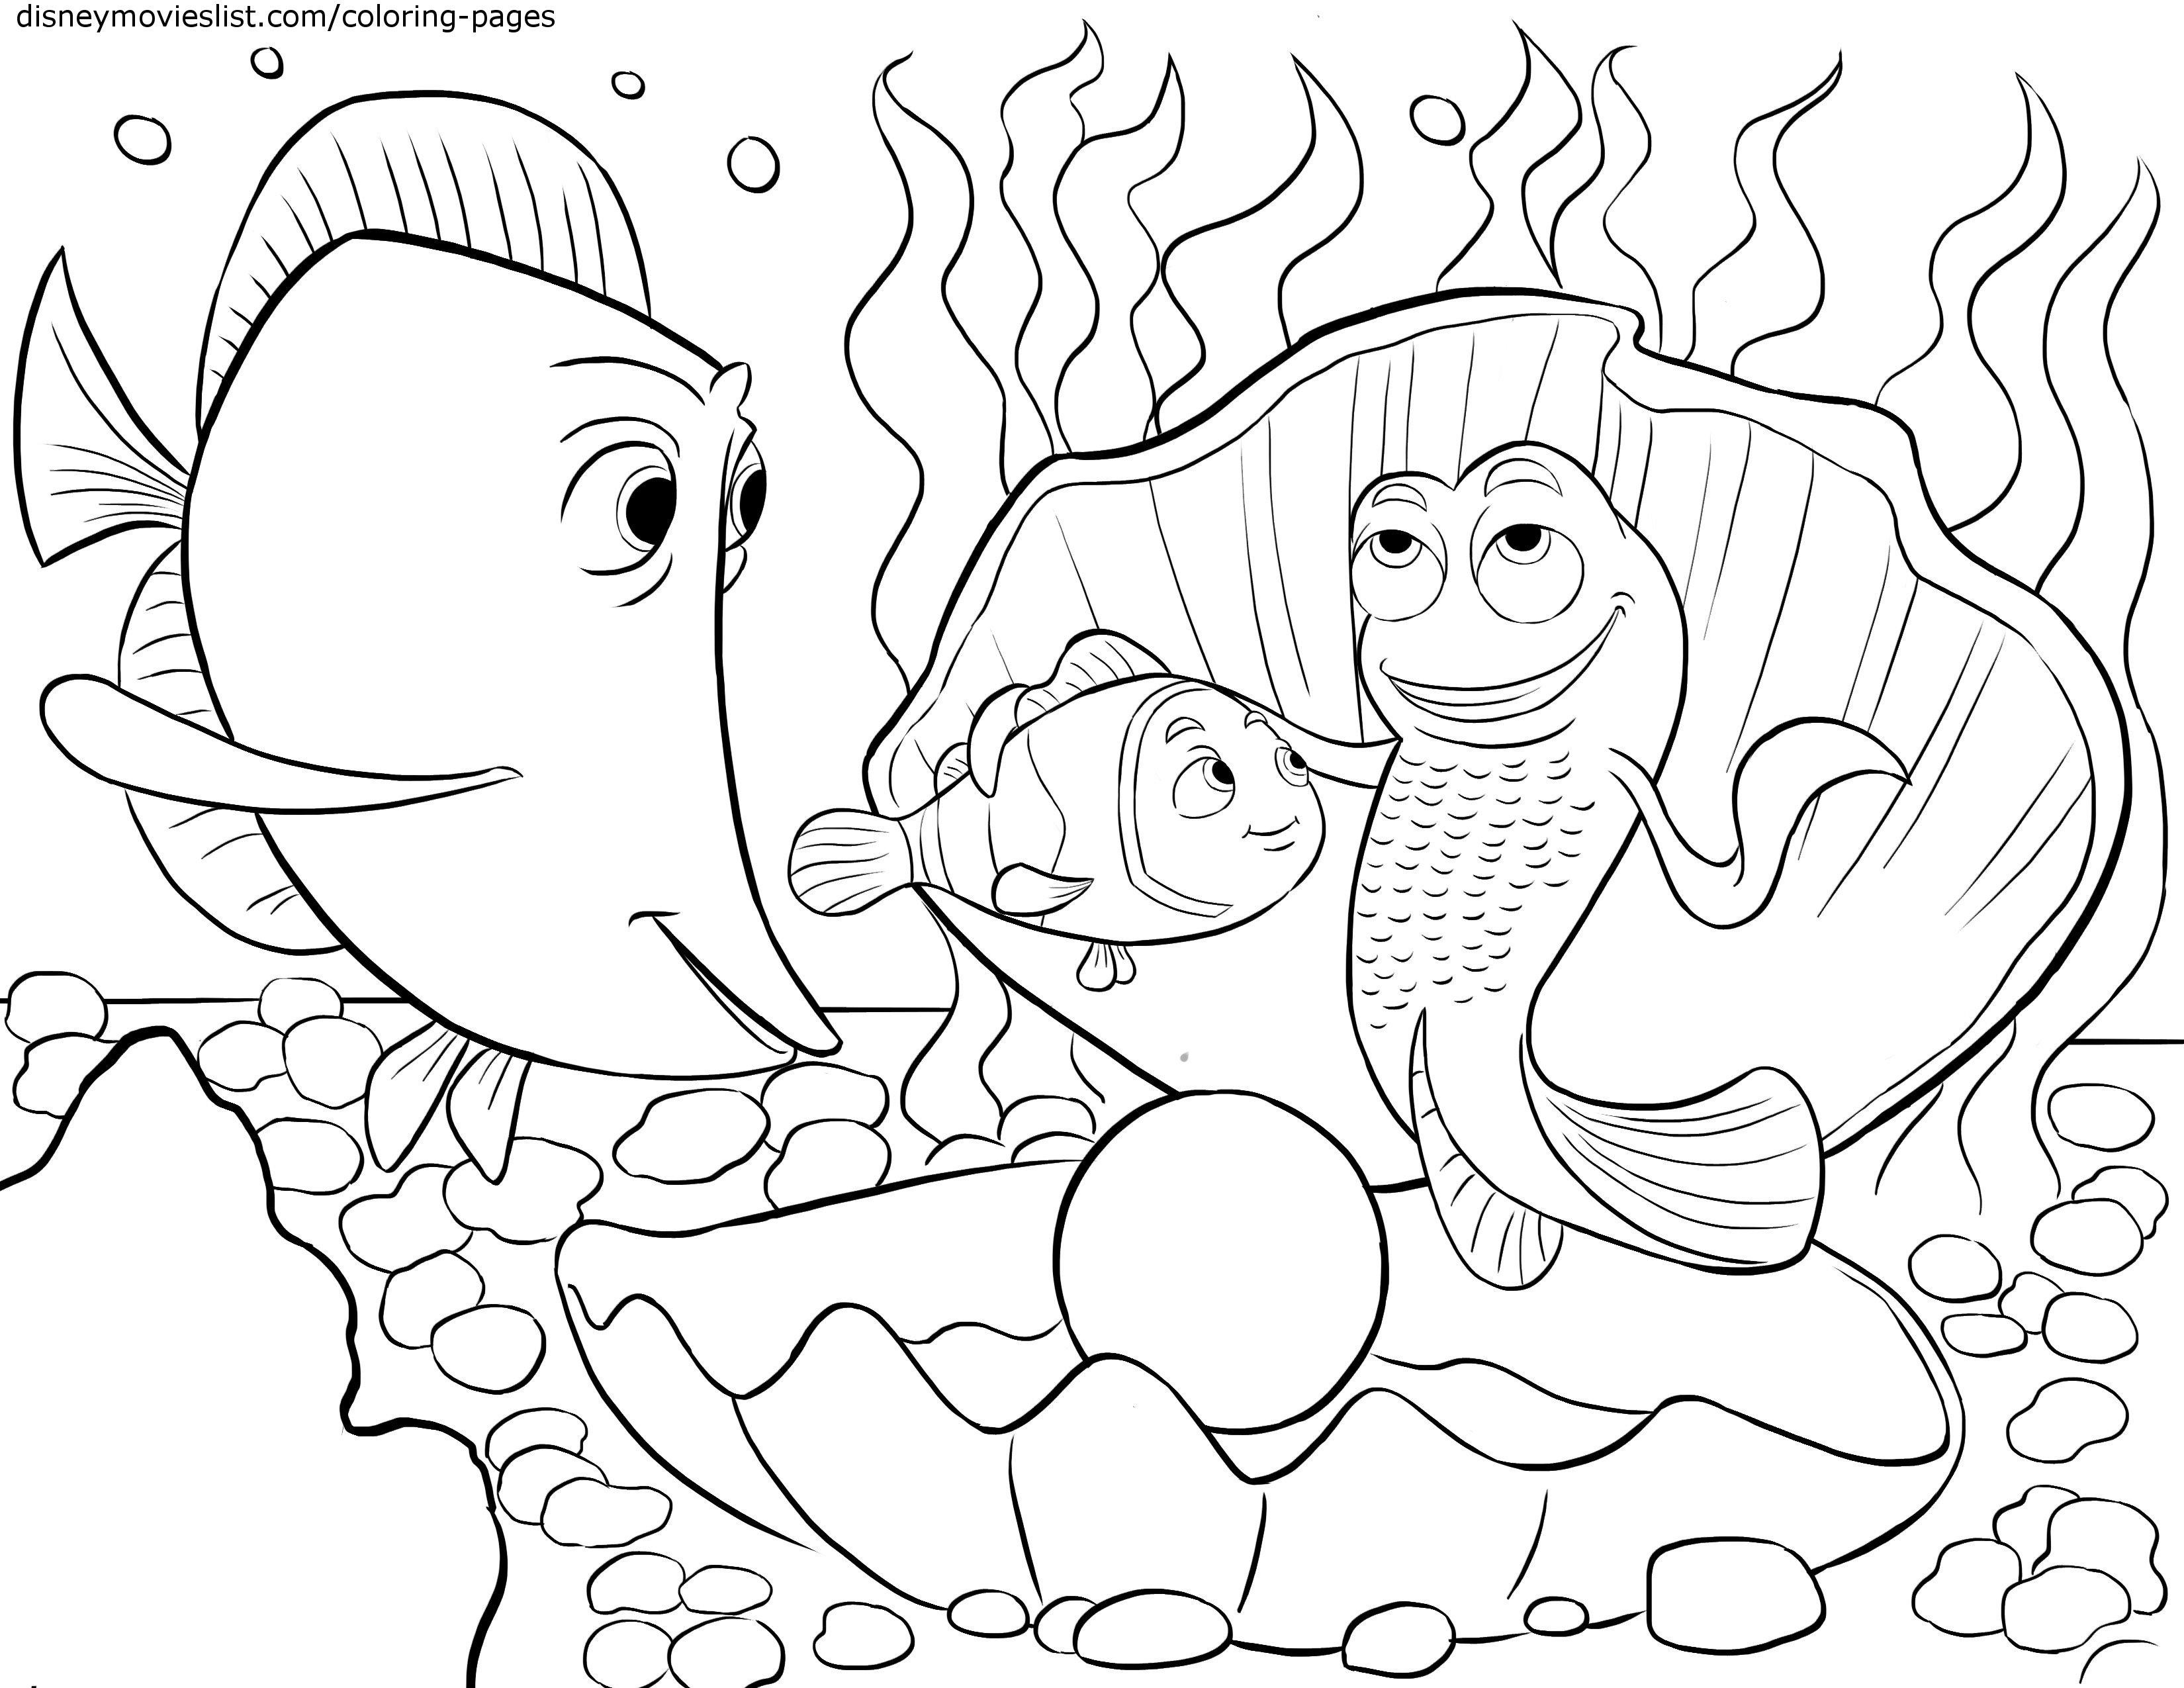 Coloring Book For Kids Pdf
 Coloring Pages Marvellous Coloring Pages For Kids Pdf